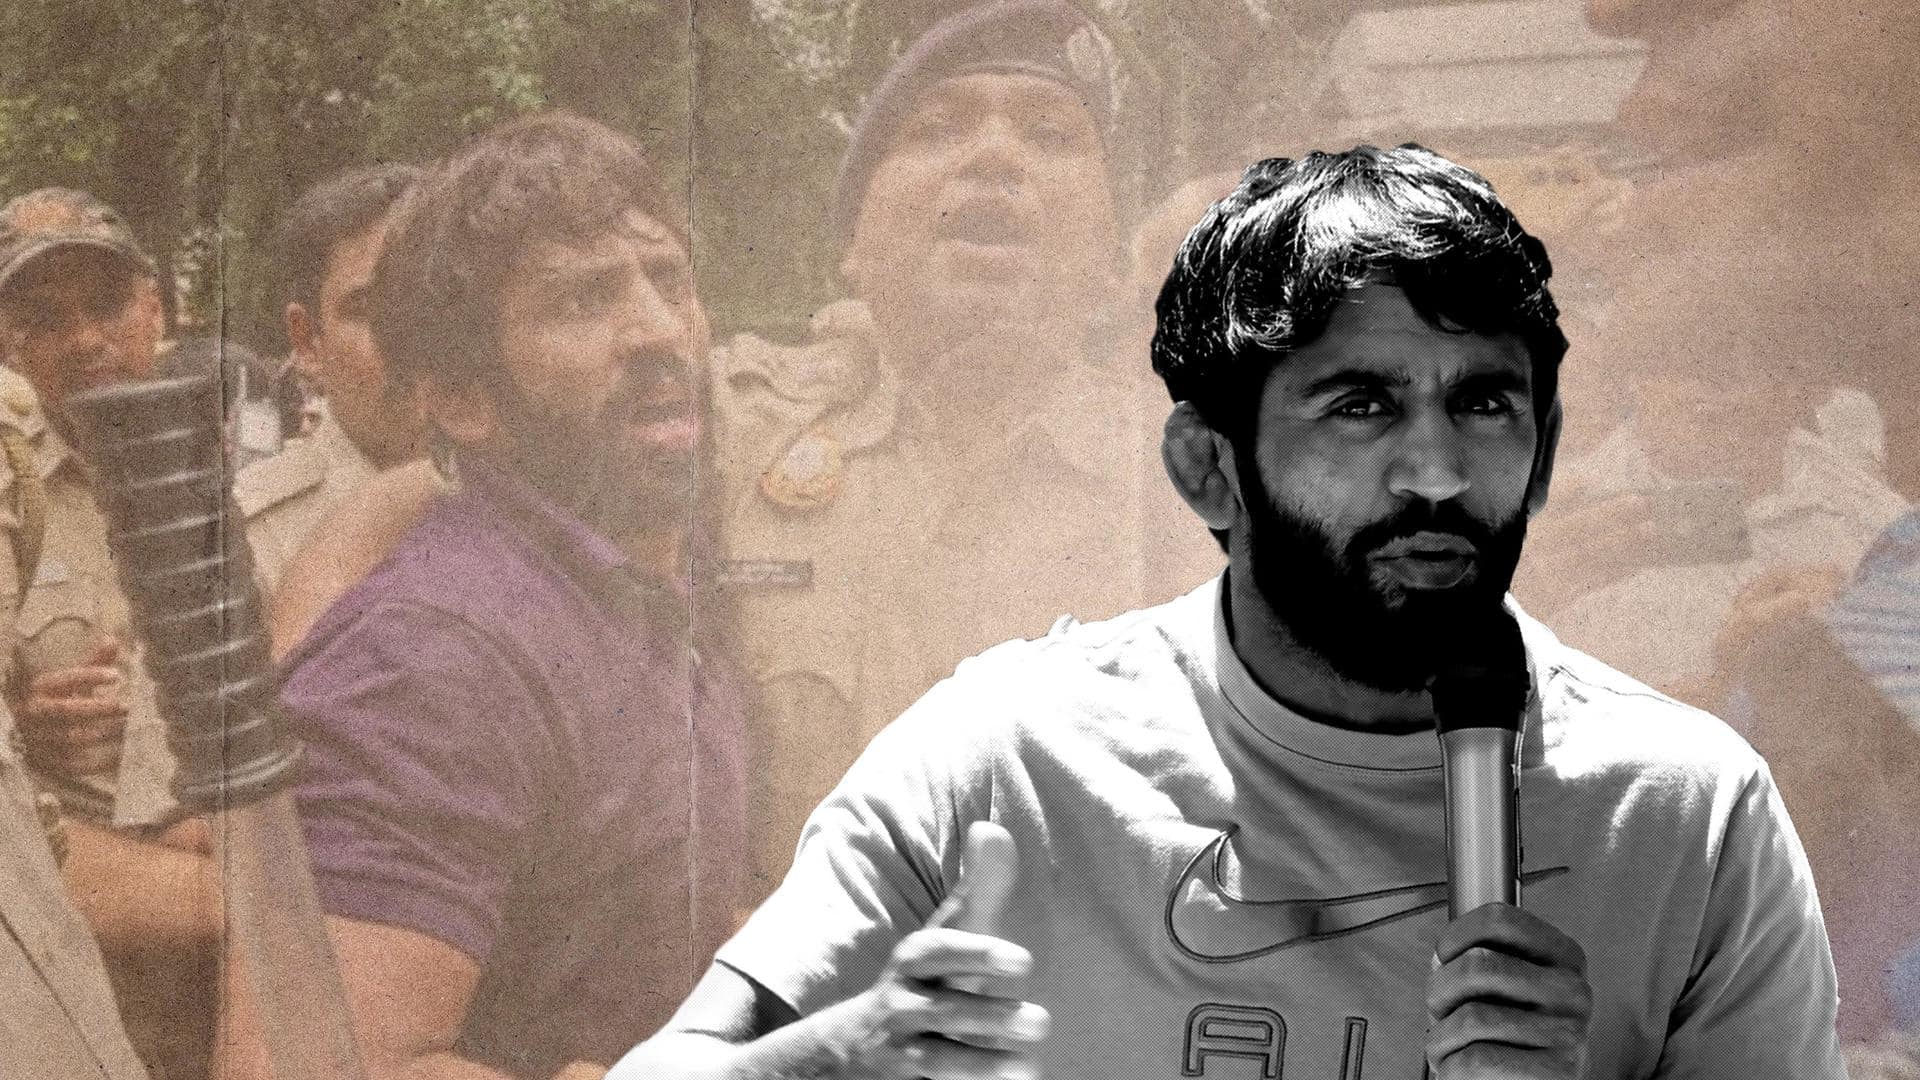 'Ready to take bullets...': Bajrang Punia on ex-IPS officer's warning 